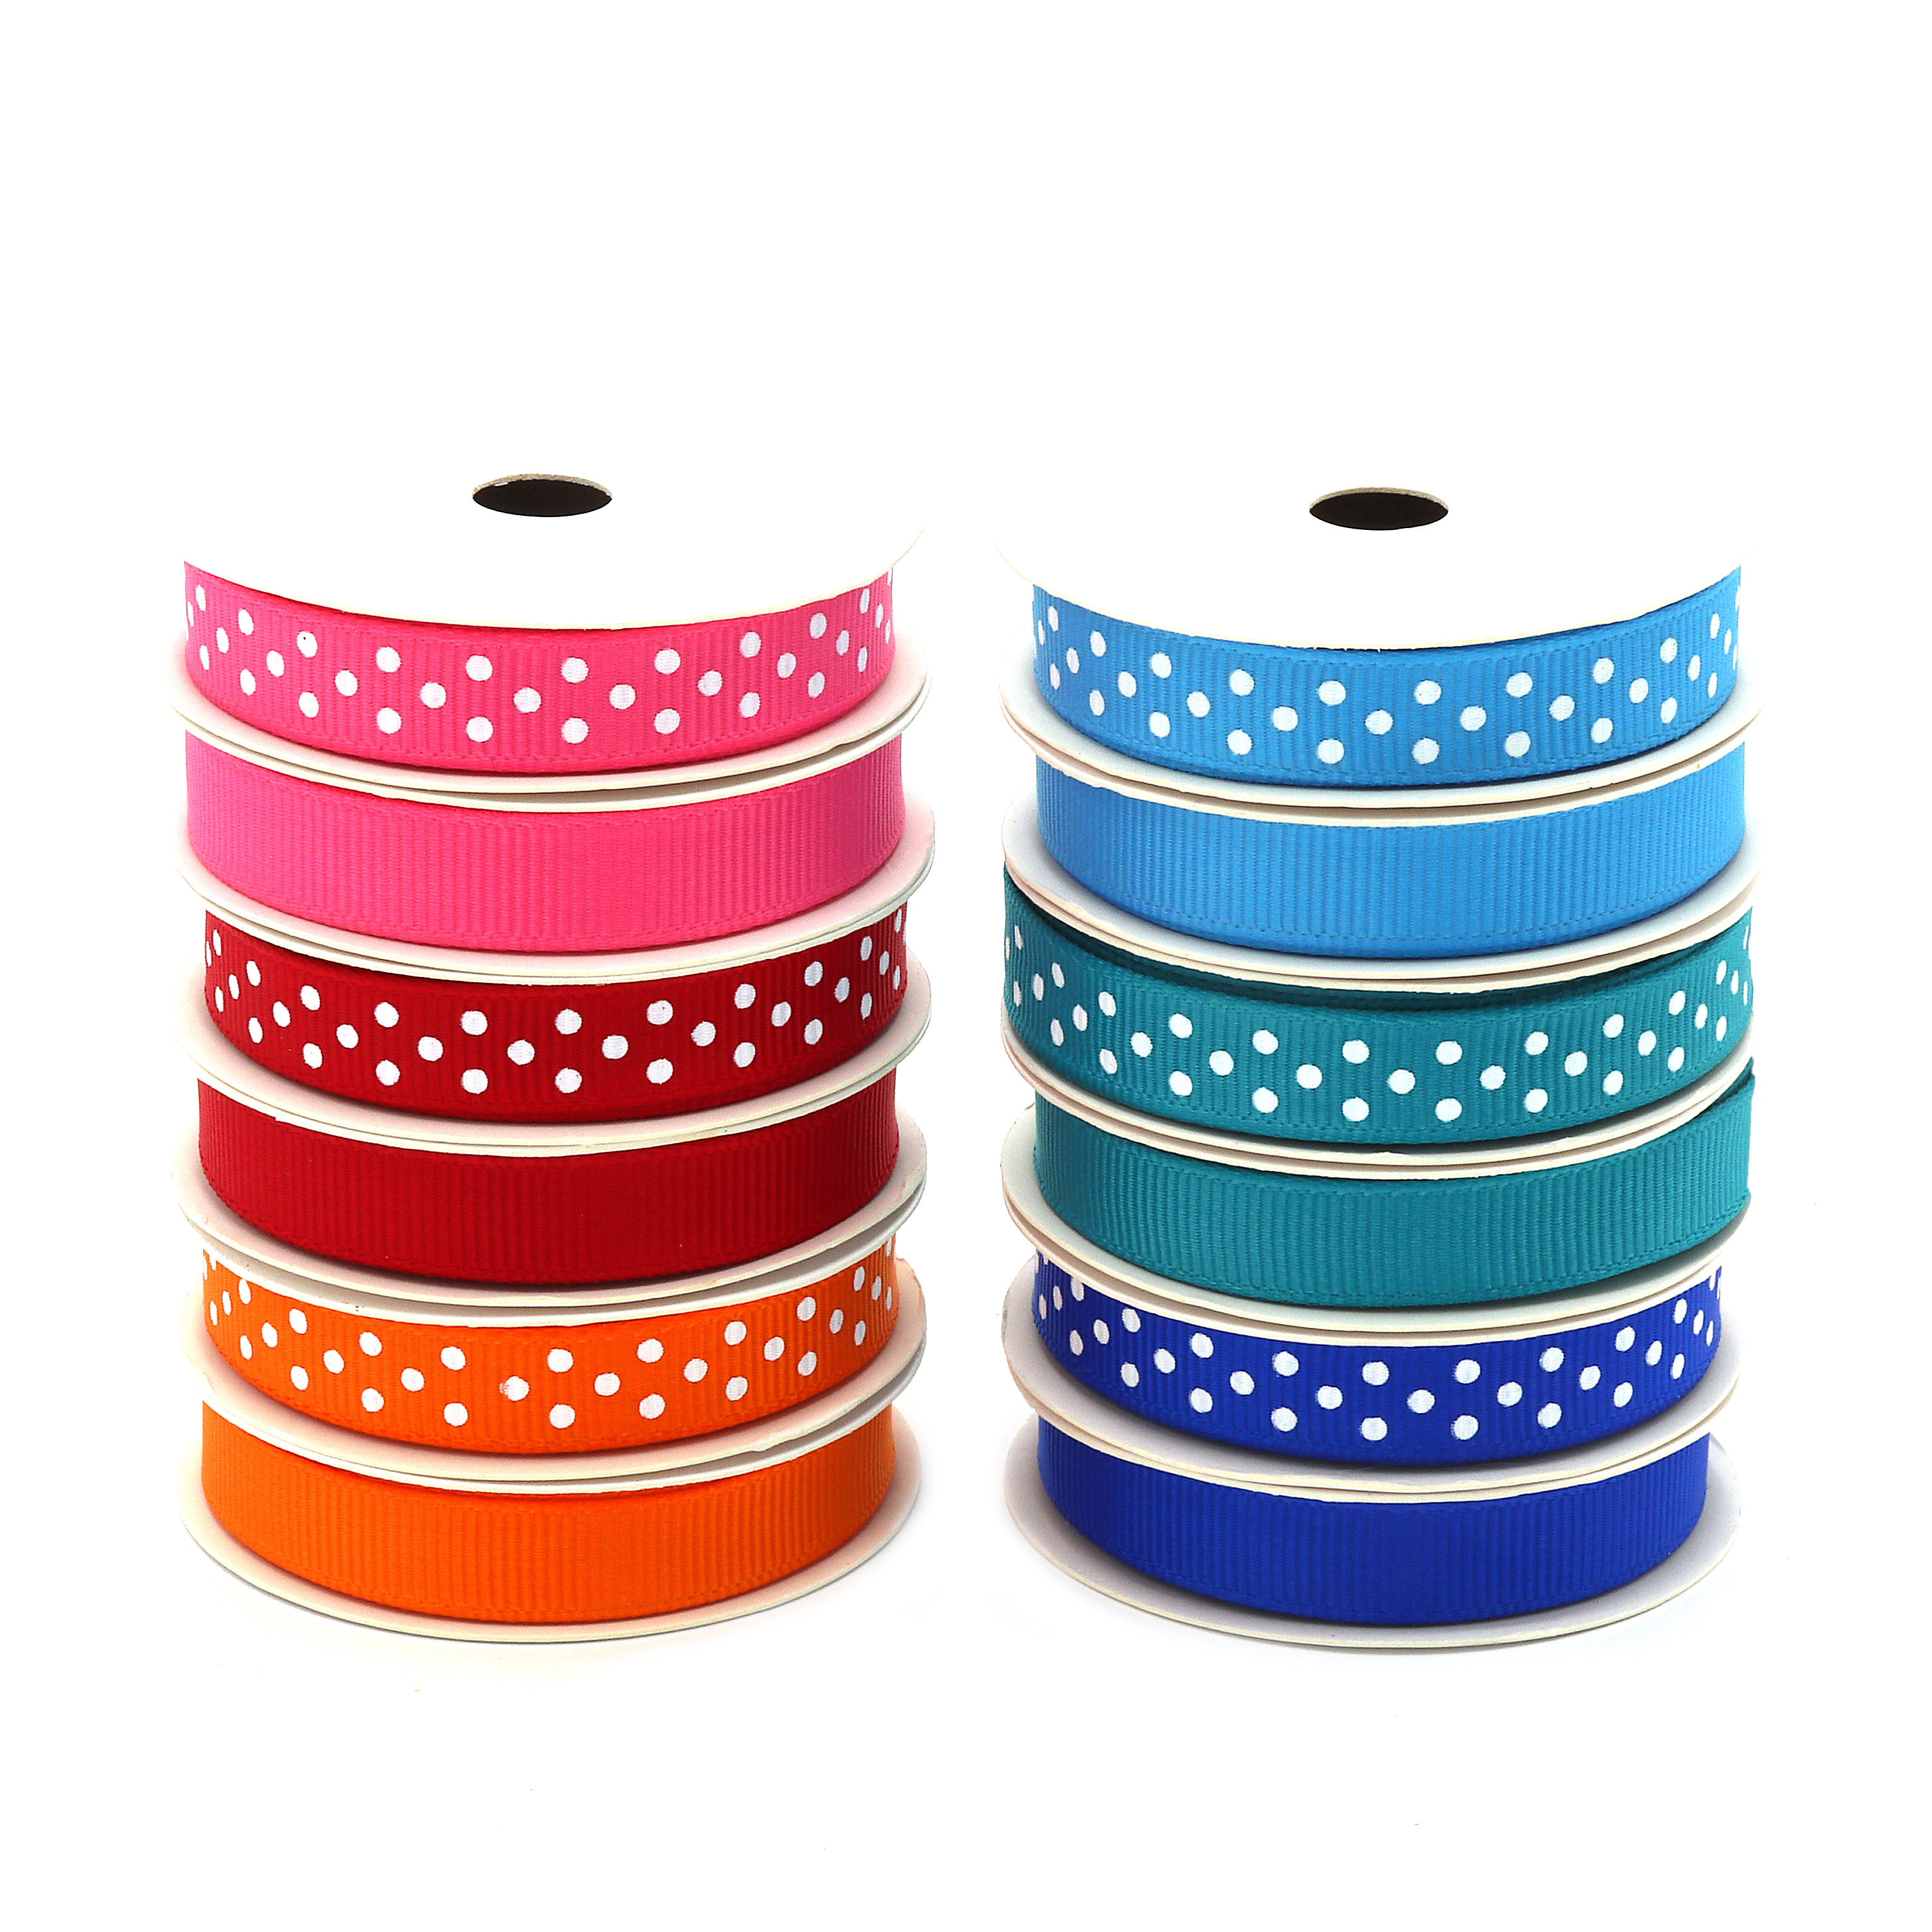 Solid and Polka Dot Grosgrain Ribbon Pack, 24 Bright Colors, 3/8" x 48 Yards by Gwen Studios - image 3 of 7